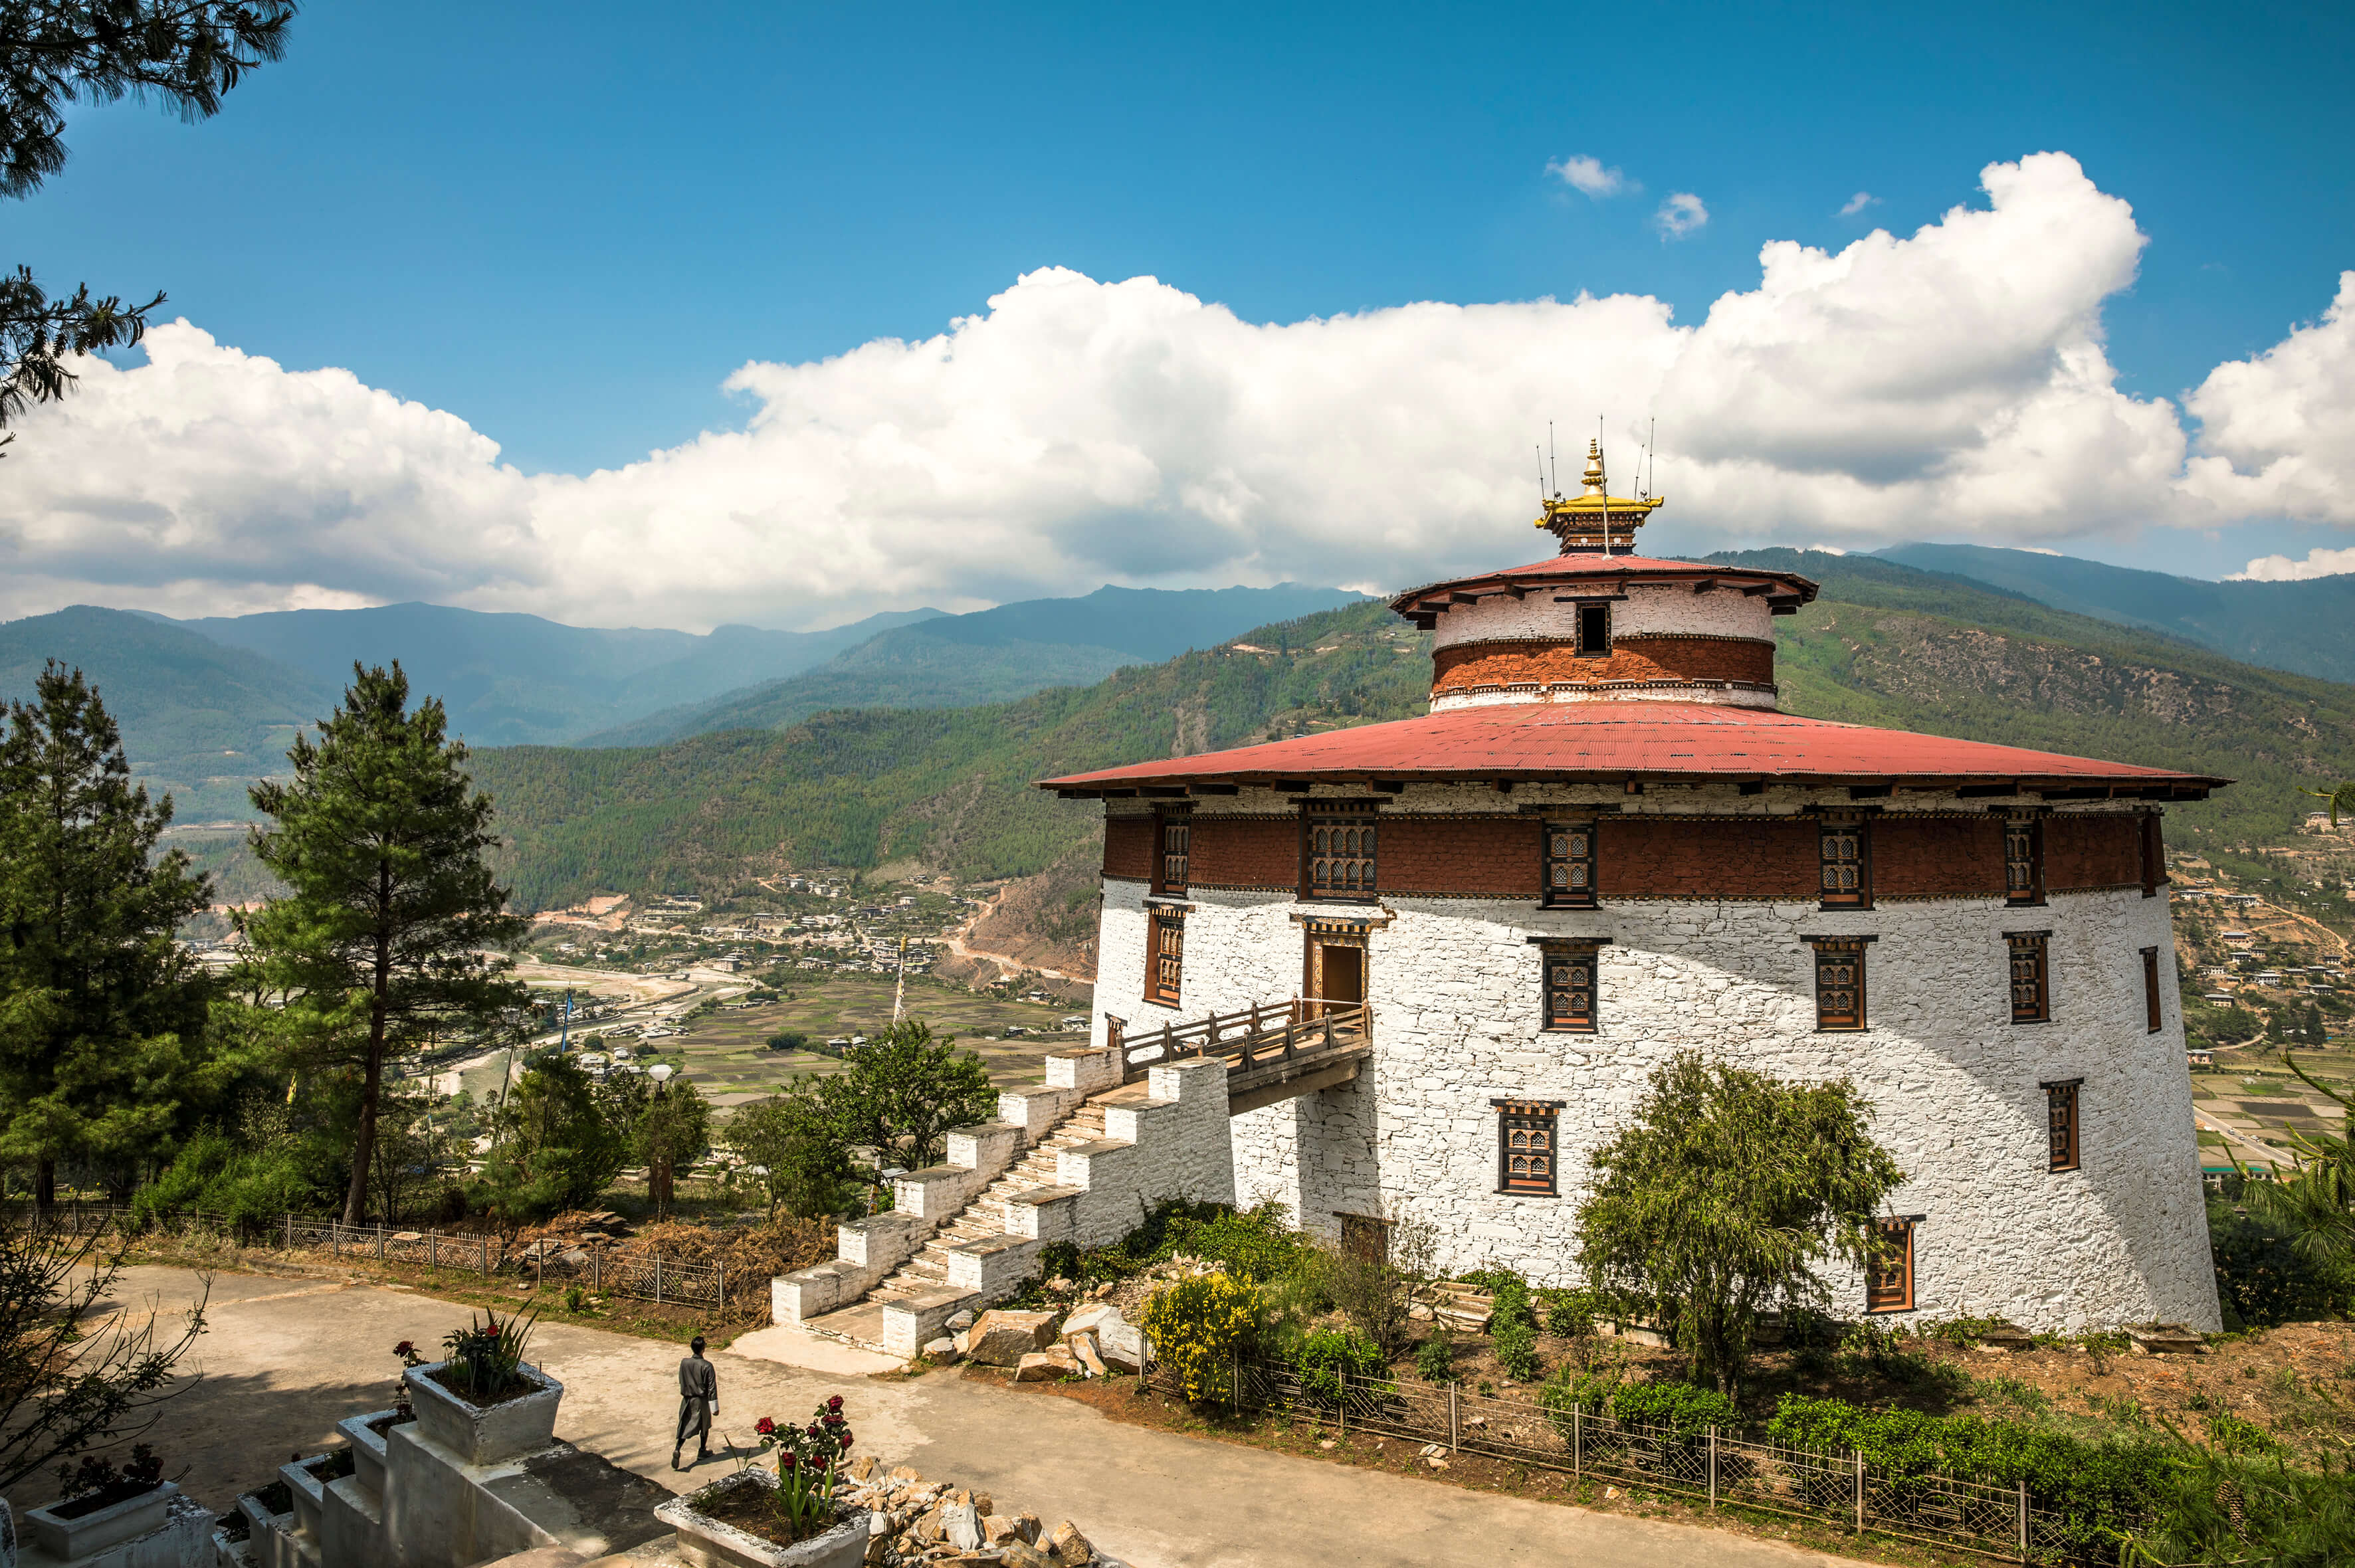 National Museum Of Bhutan With A Red Roof And A Red Roof With A Red Roof And A Person Walking Up